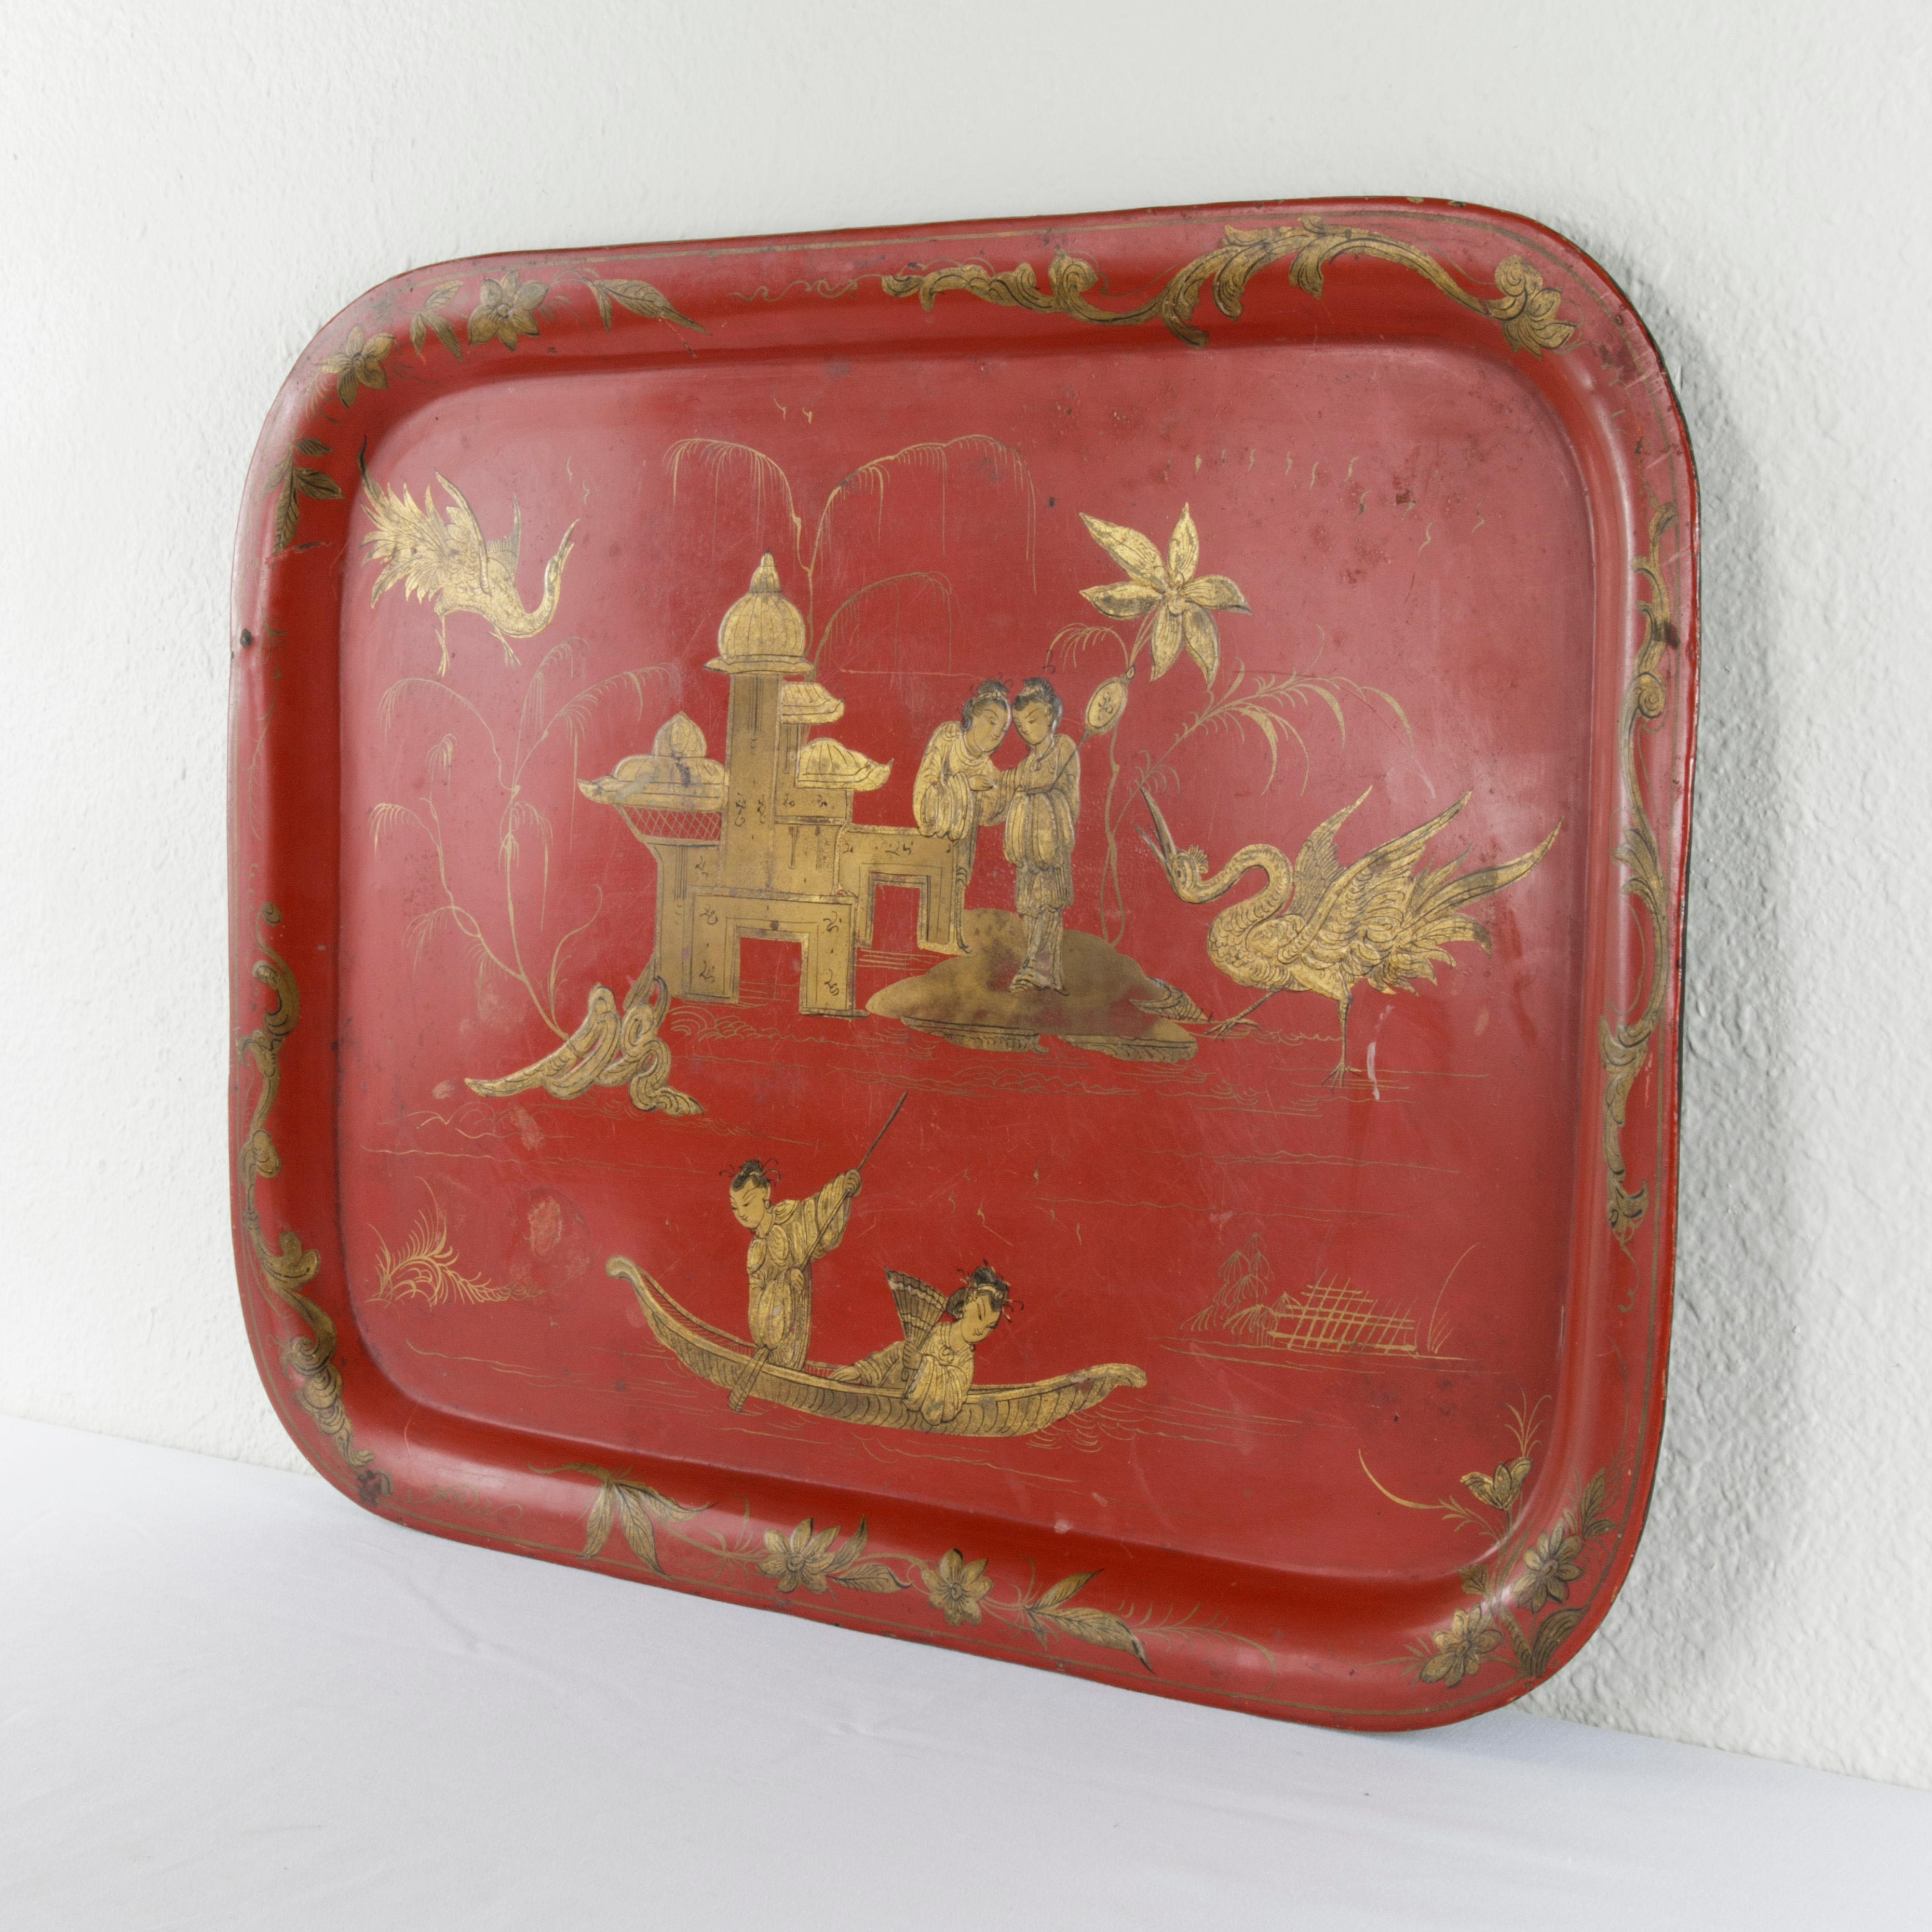 This very large French Napoleon III period red tole metal tray from the late 19th century features beautifully hand painted gold chinoiserie. This imagery from the Far East became popular during the reign of Napoleon III. Displayed in the middle of